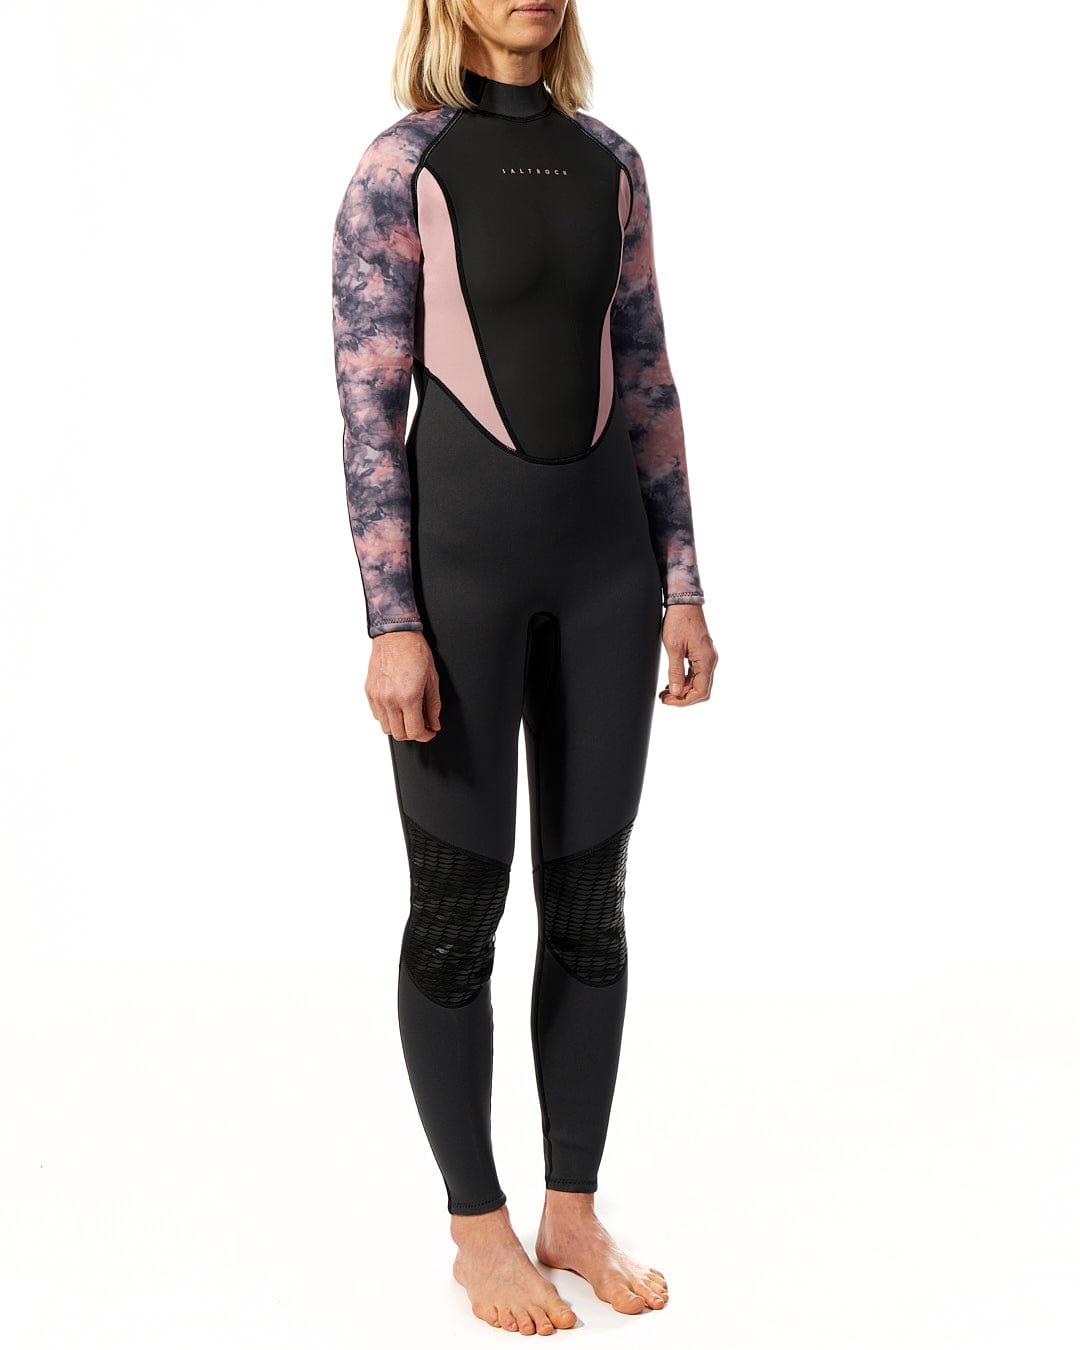 A woman wearing the Saltrock Vision - Womens 3/2 Back Zip Wetsuit - Black/Pink standing on a white background.